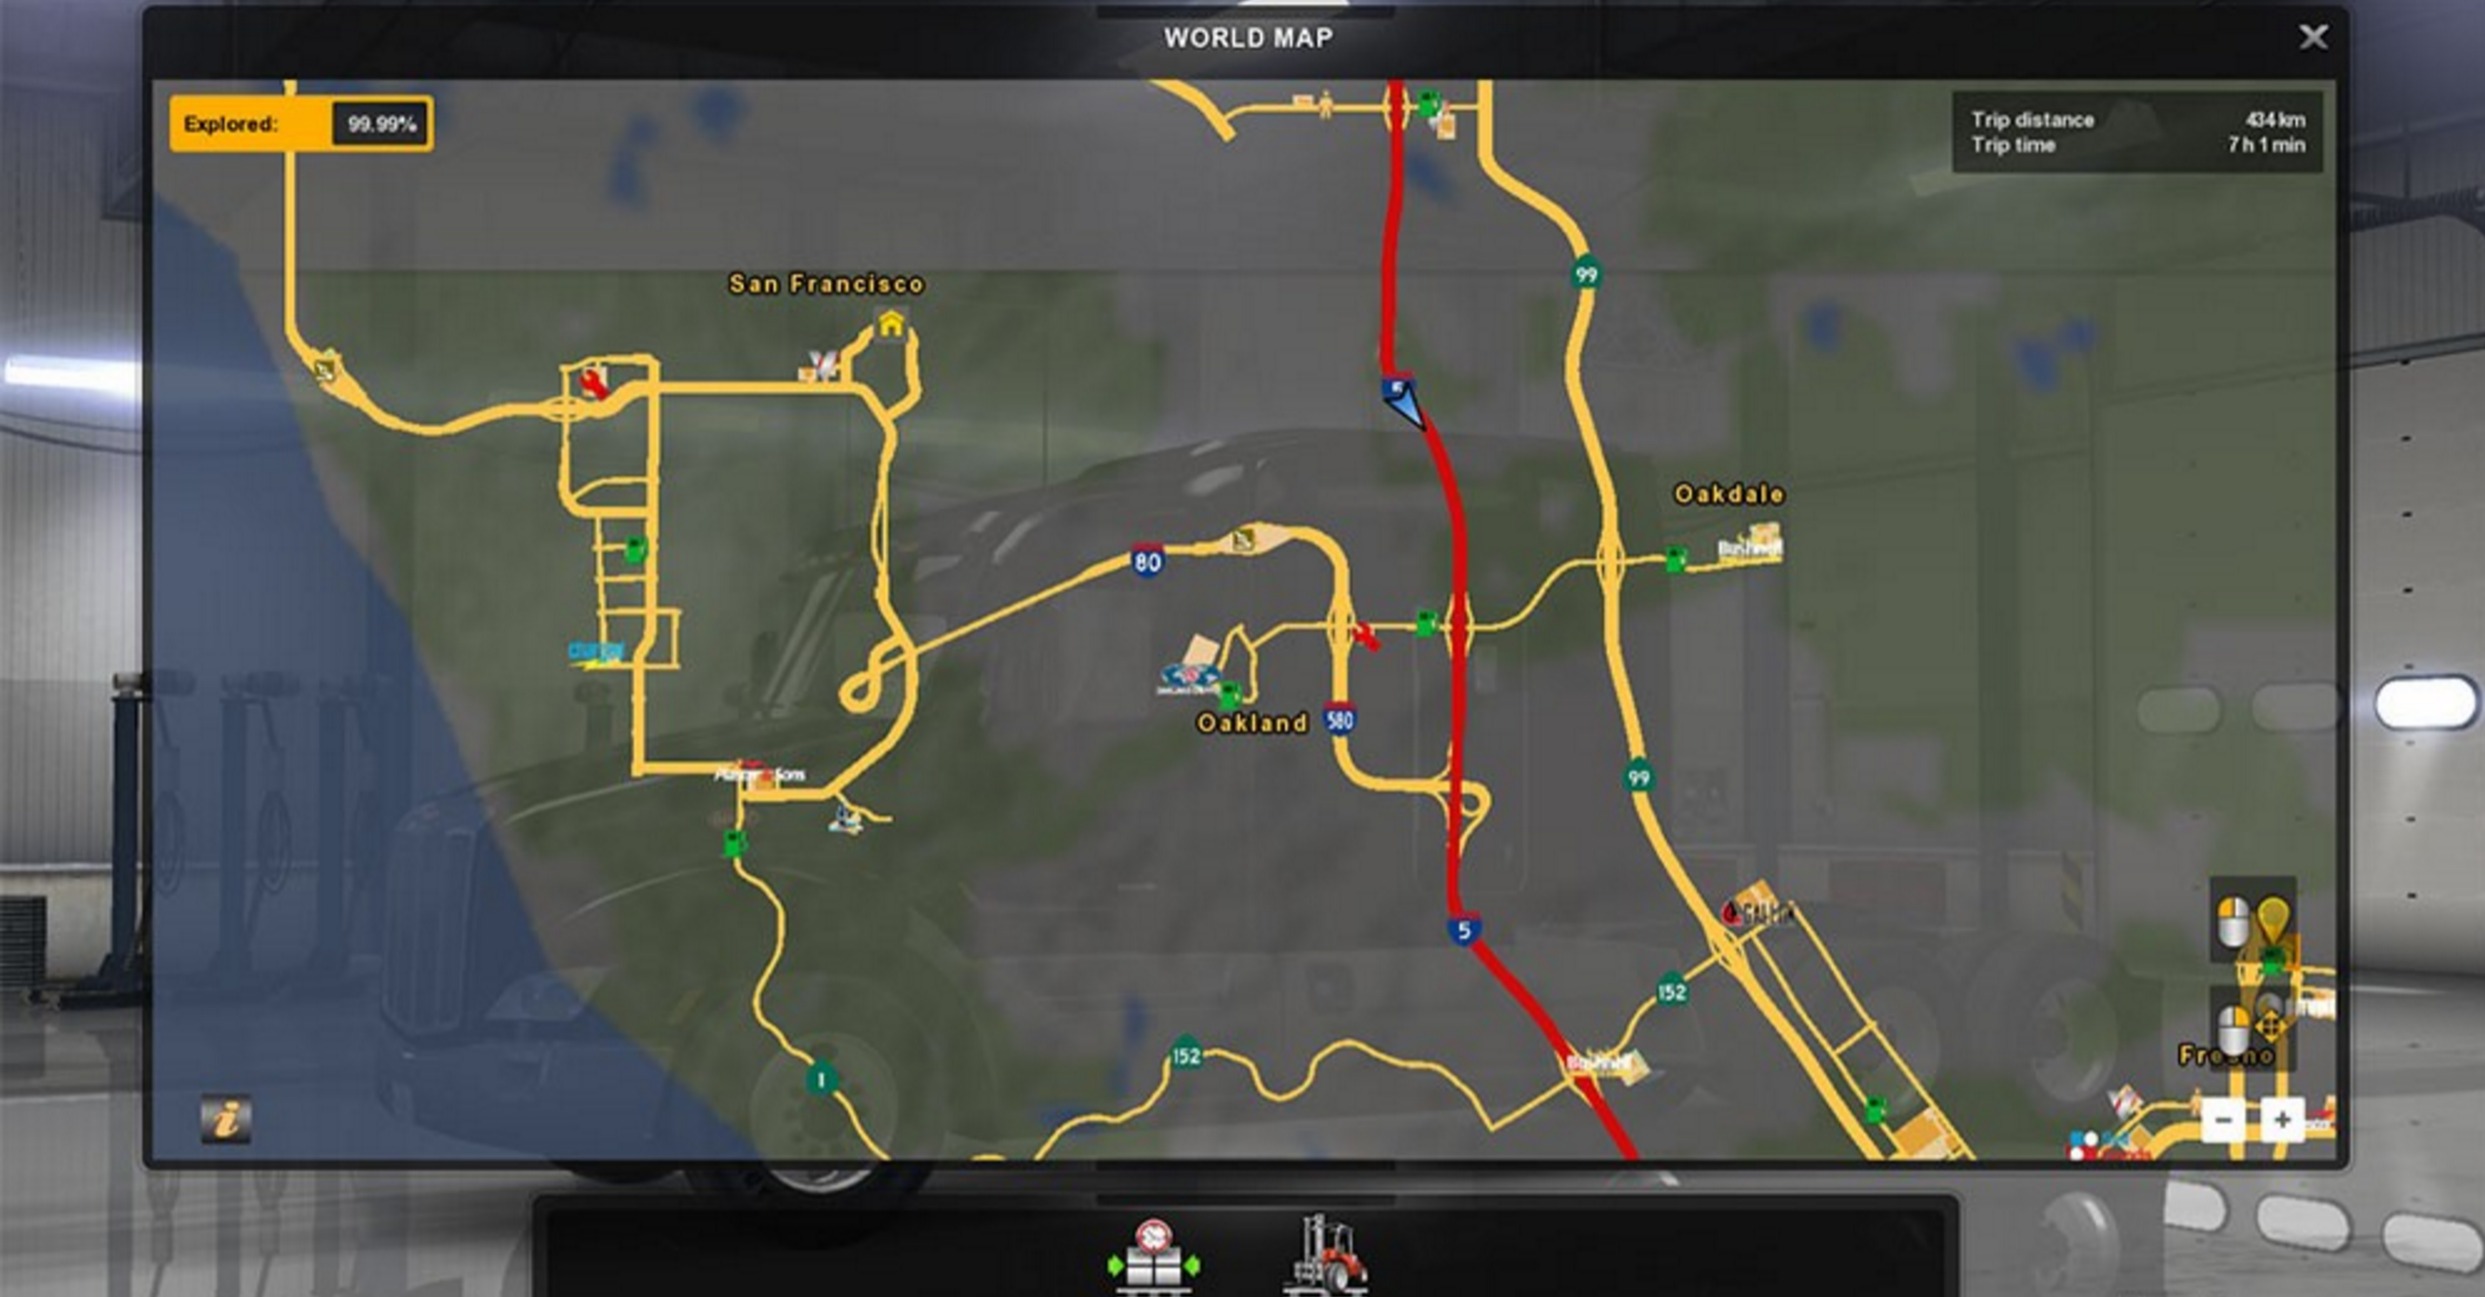 Background Map And Nav Icons Gps Route Advisor For